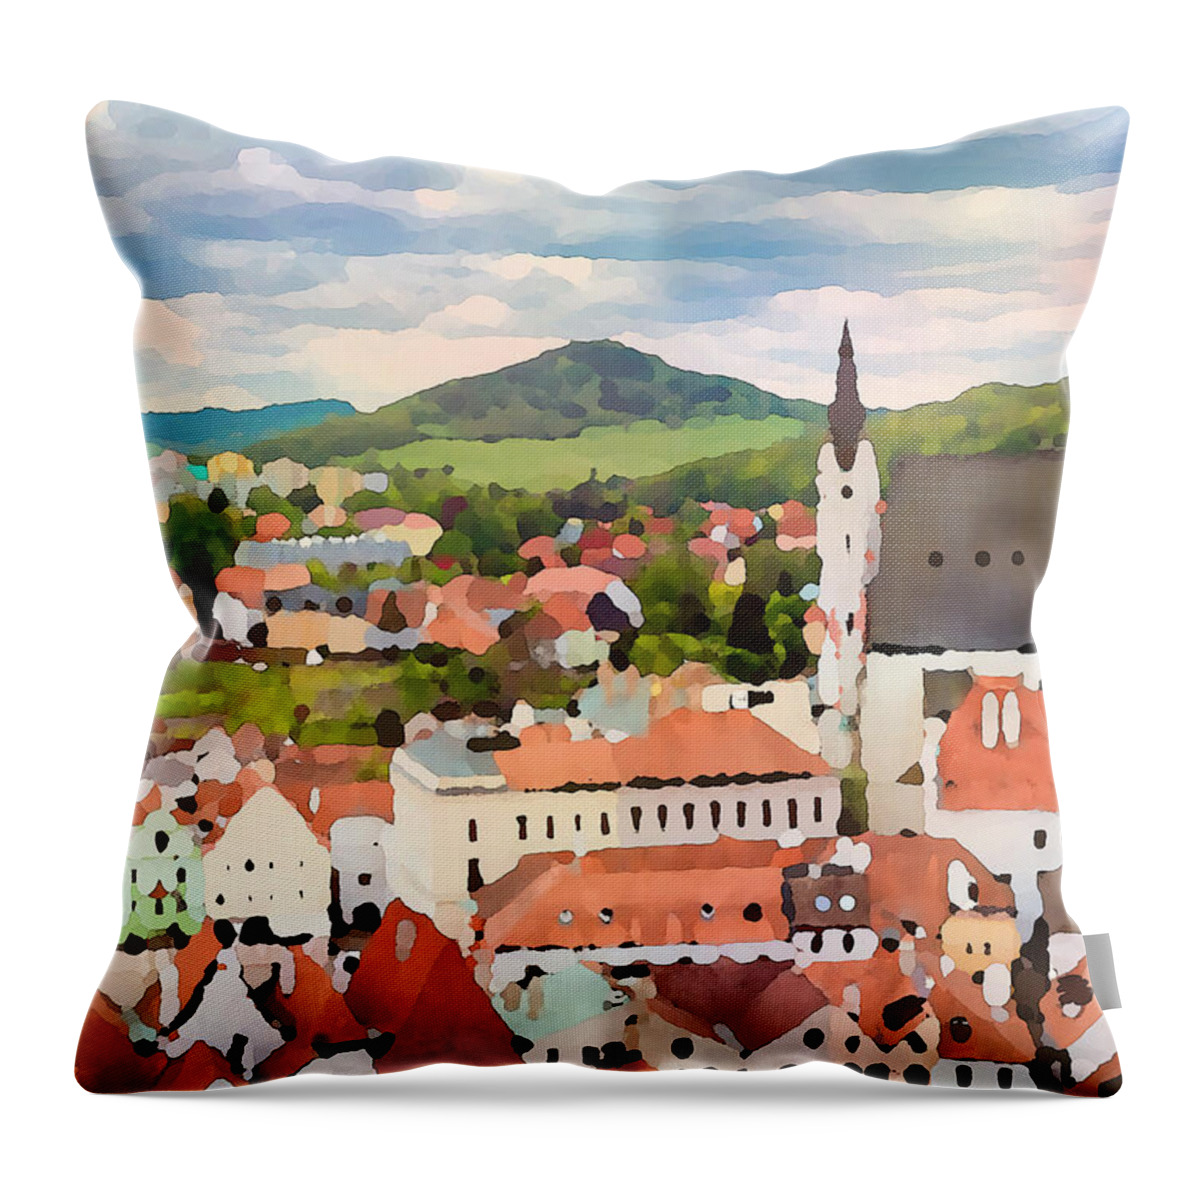 Landscape Throw Pillow featuring the mixed media Medieval Village by Shelli Fitzpatrick